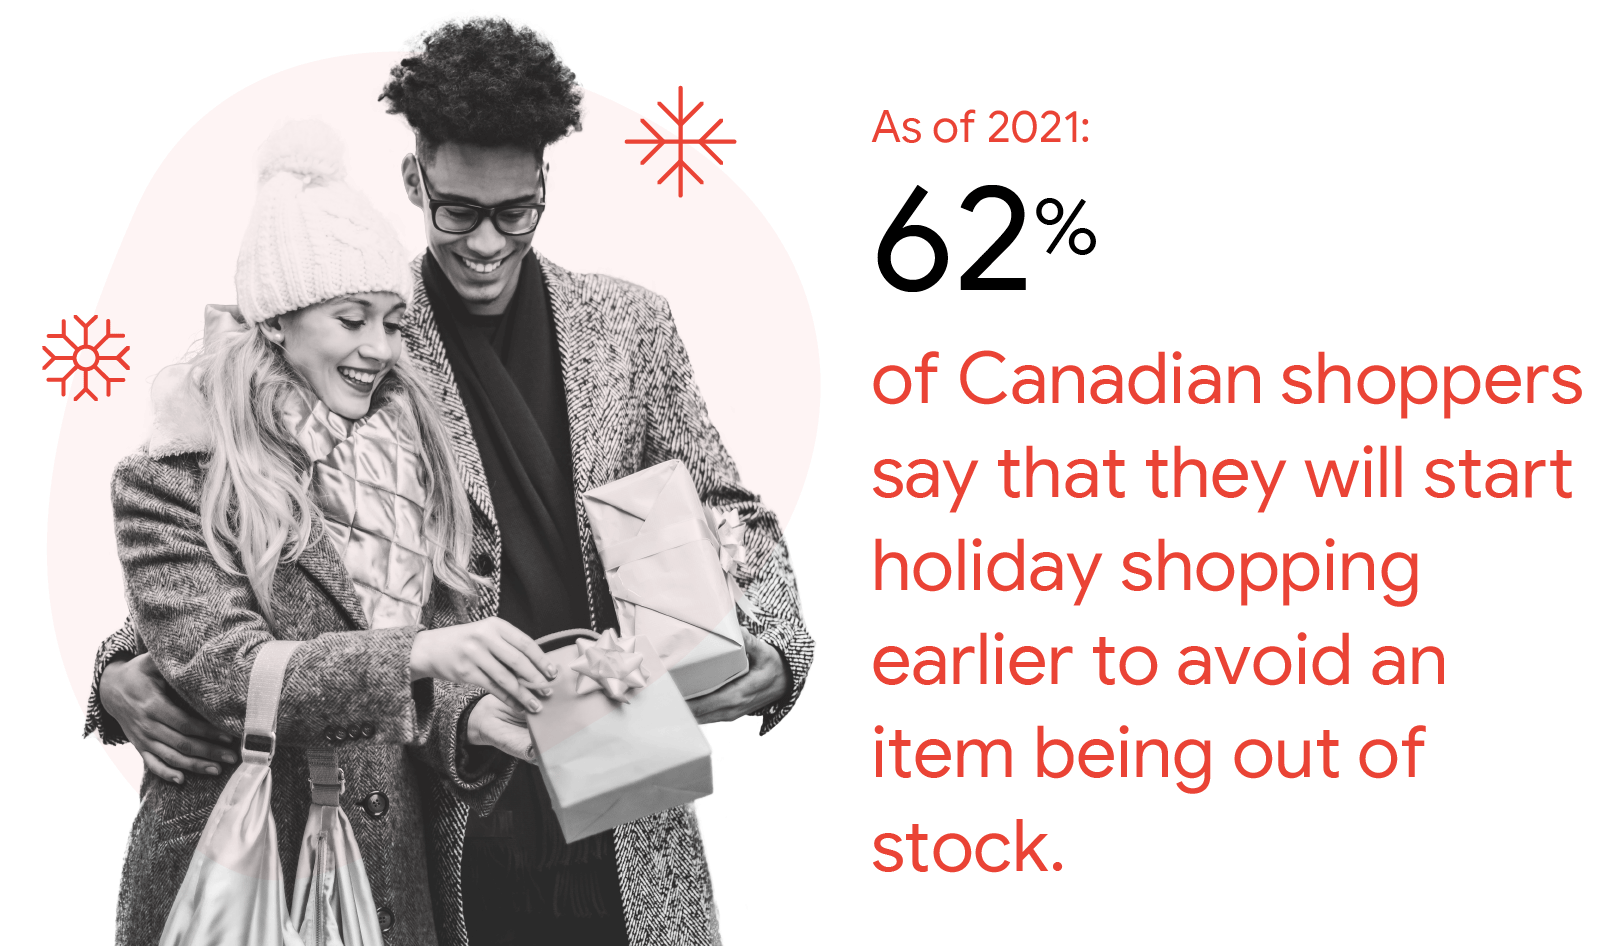 At left, a man and woman exchange gifts. 62% of Canadian shoppers say that they will start holiday shopping earlier to avoid an item being out of stock.